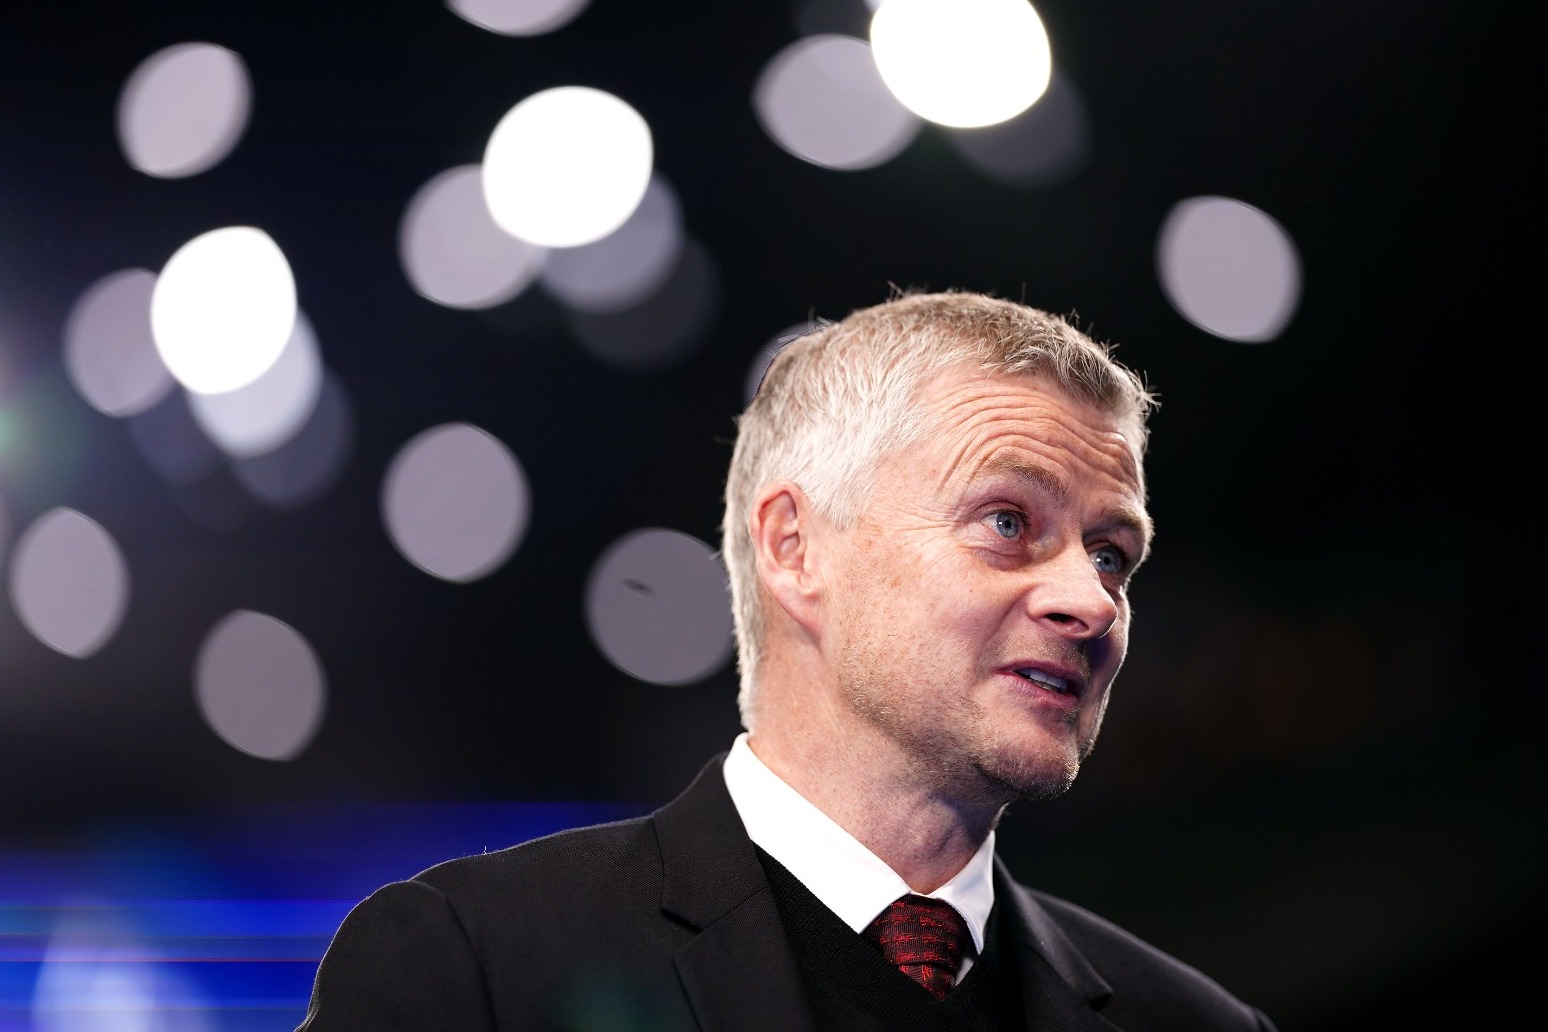 Keep it coming – Ole Gunnar Solskjaer insists he thrives on criticism 